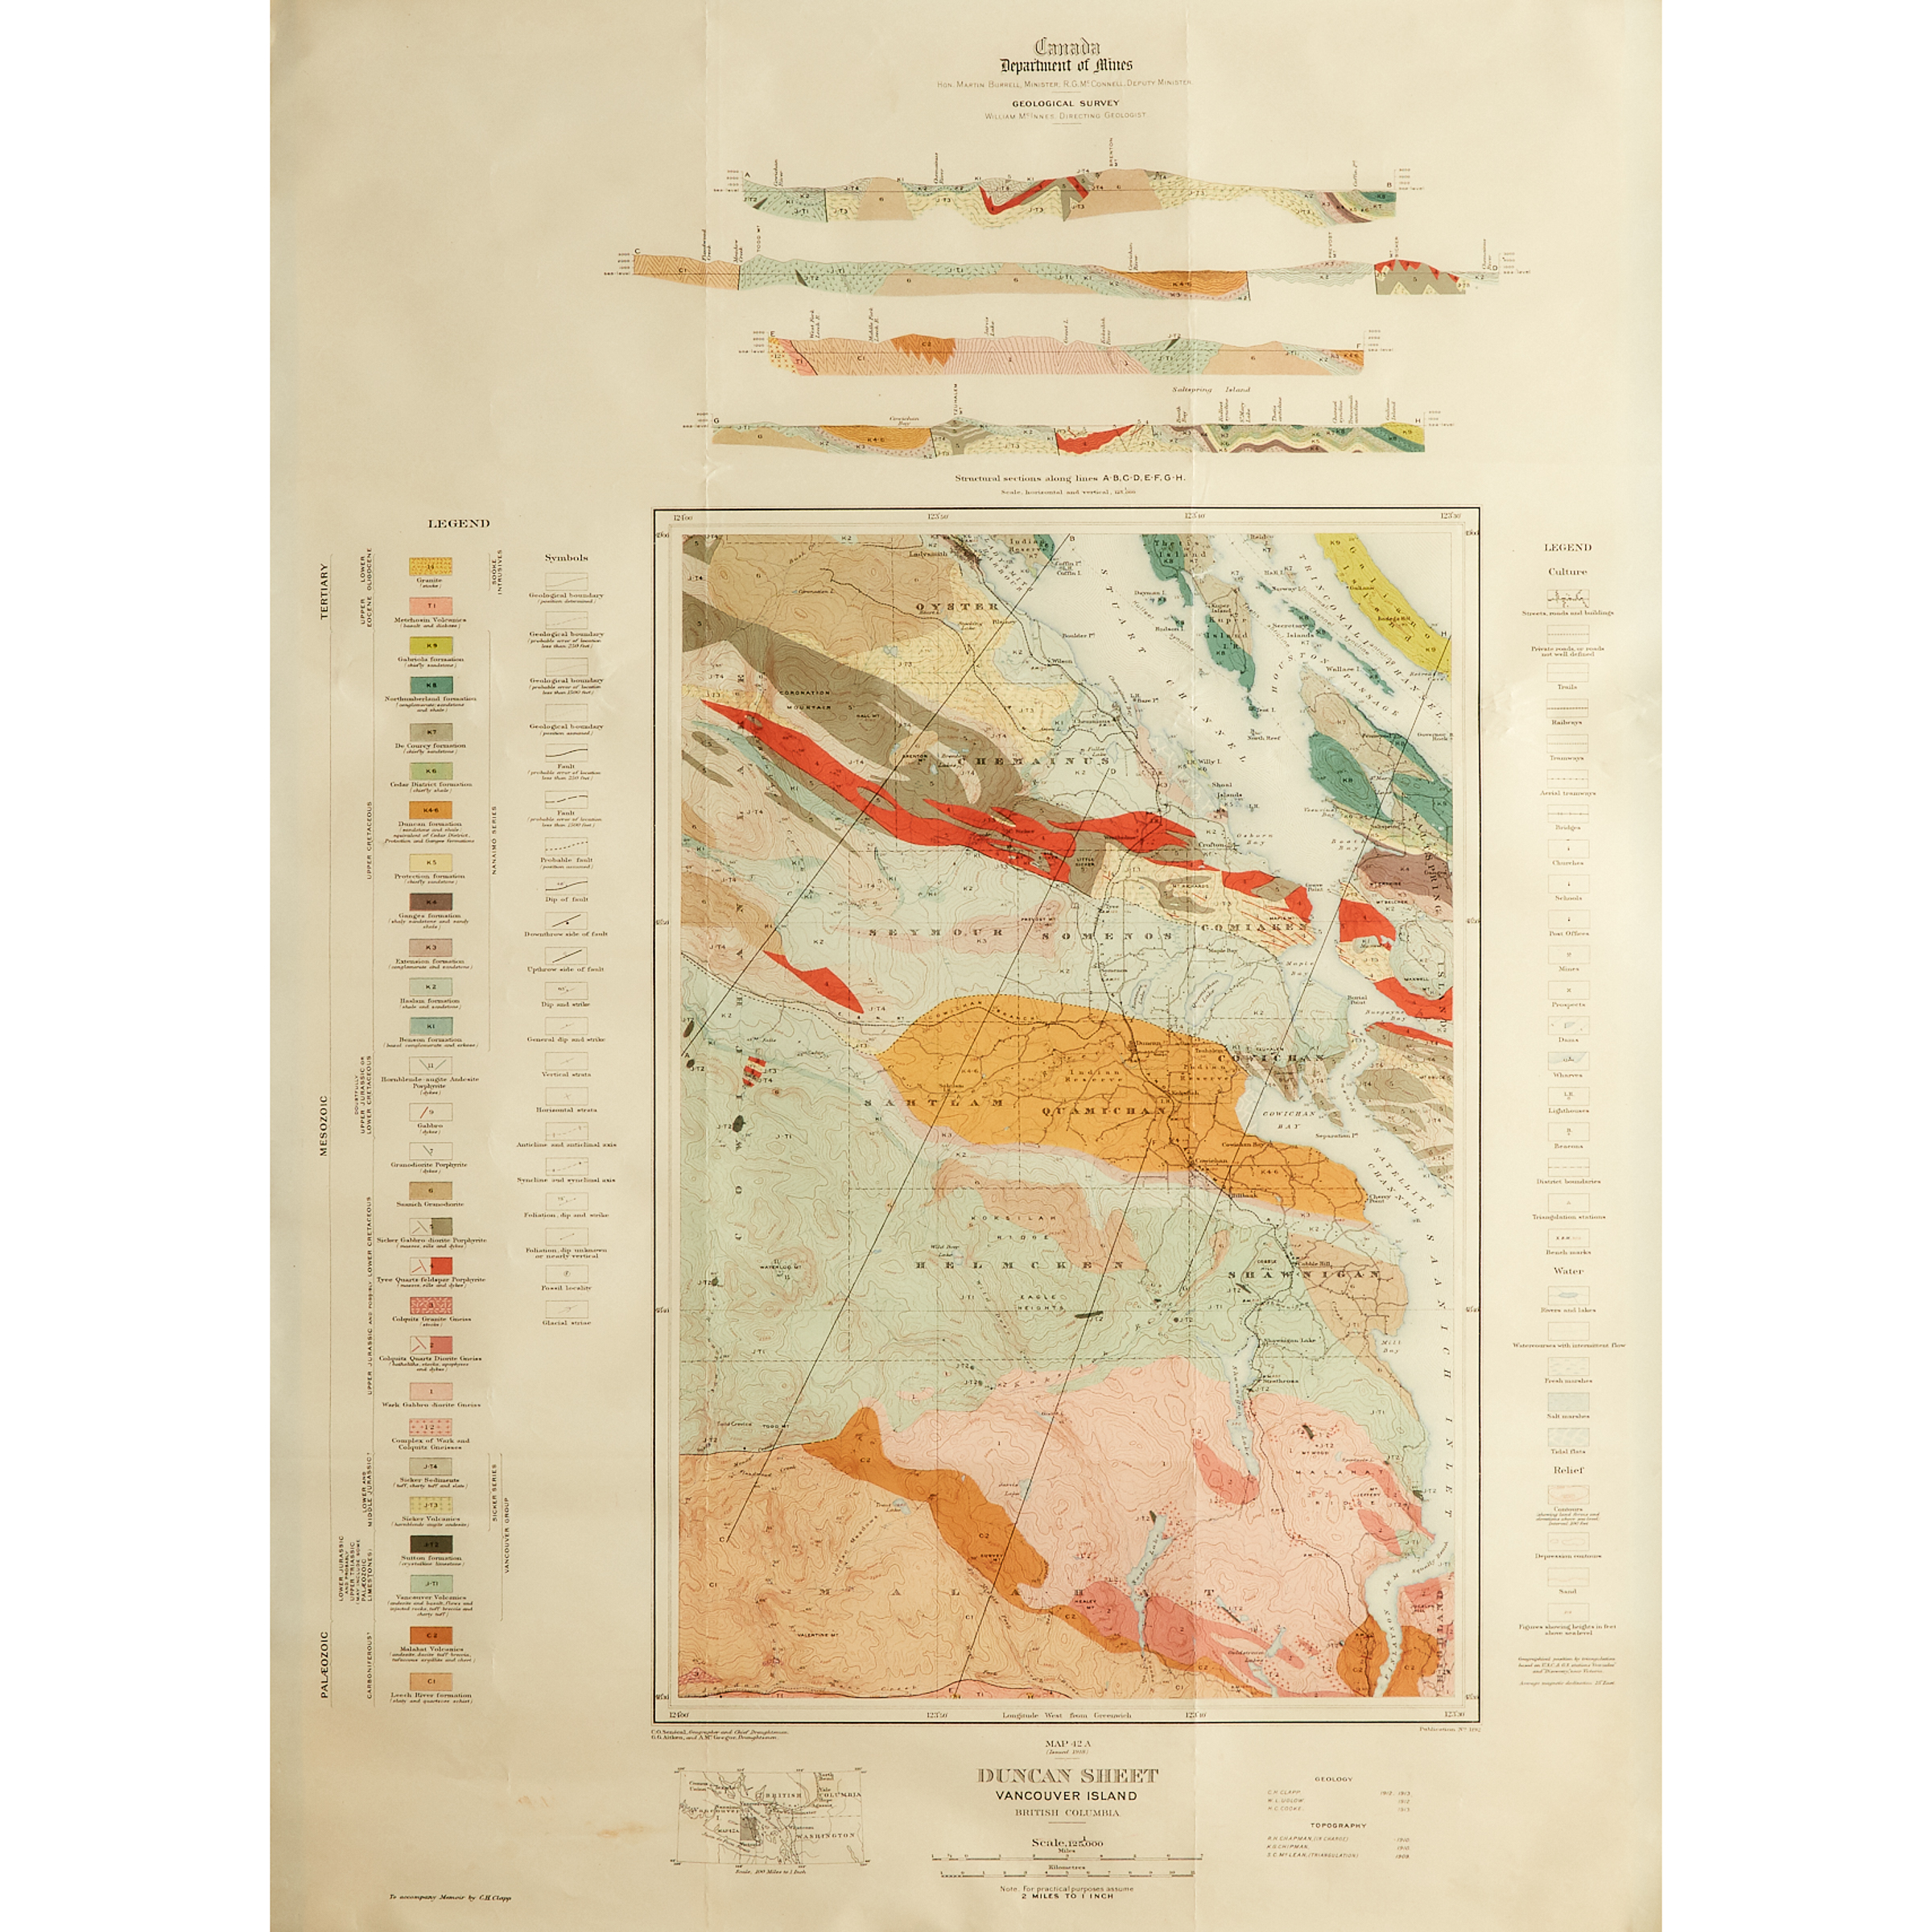 Canada Department of Mines Geological Survey of Duncan, British Columbia, 1918